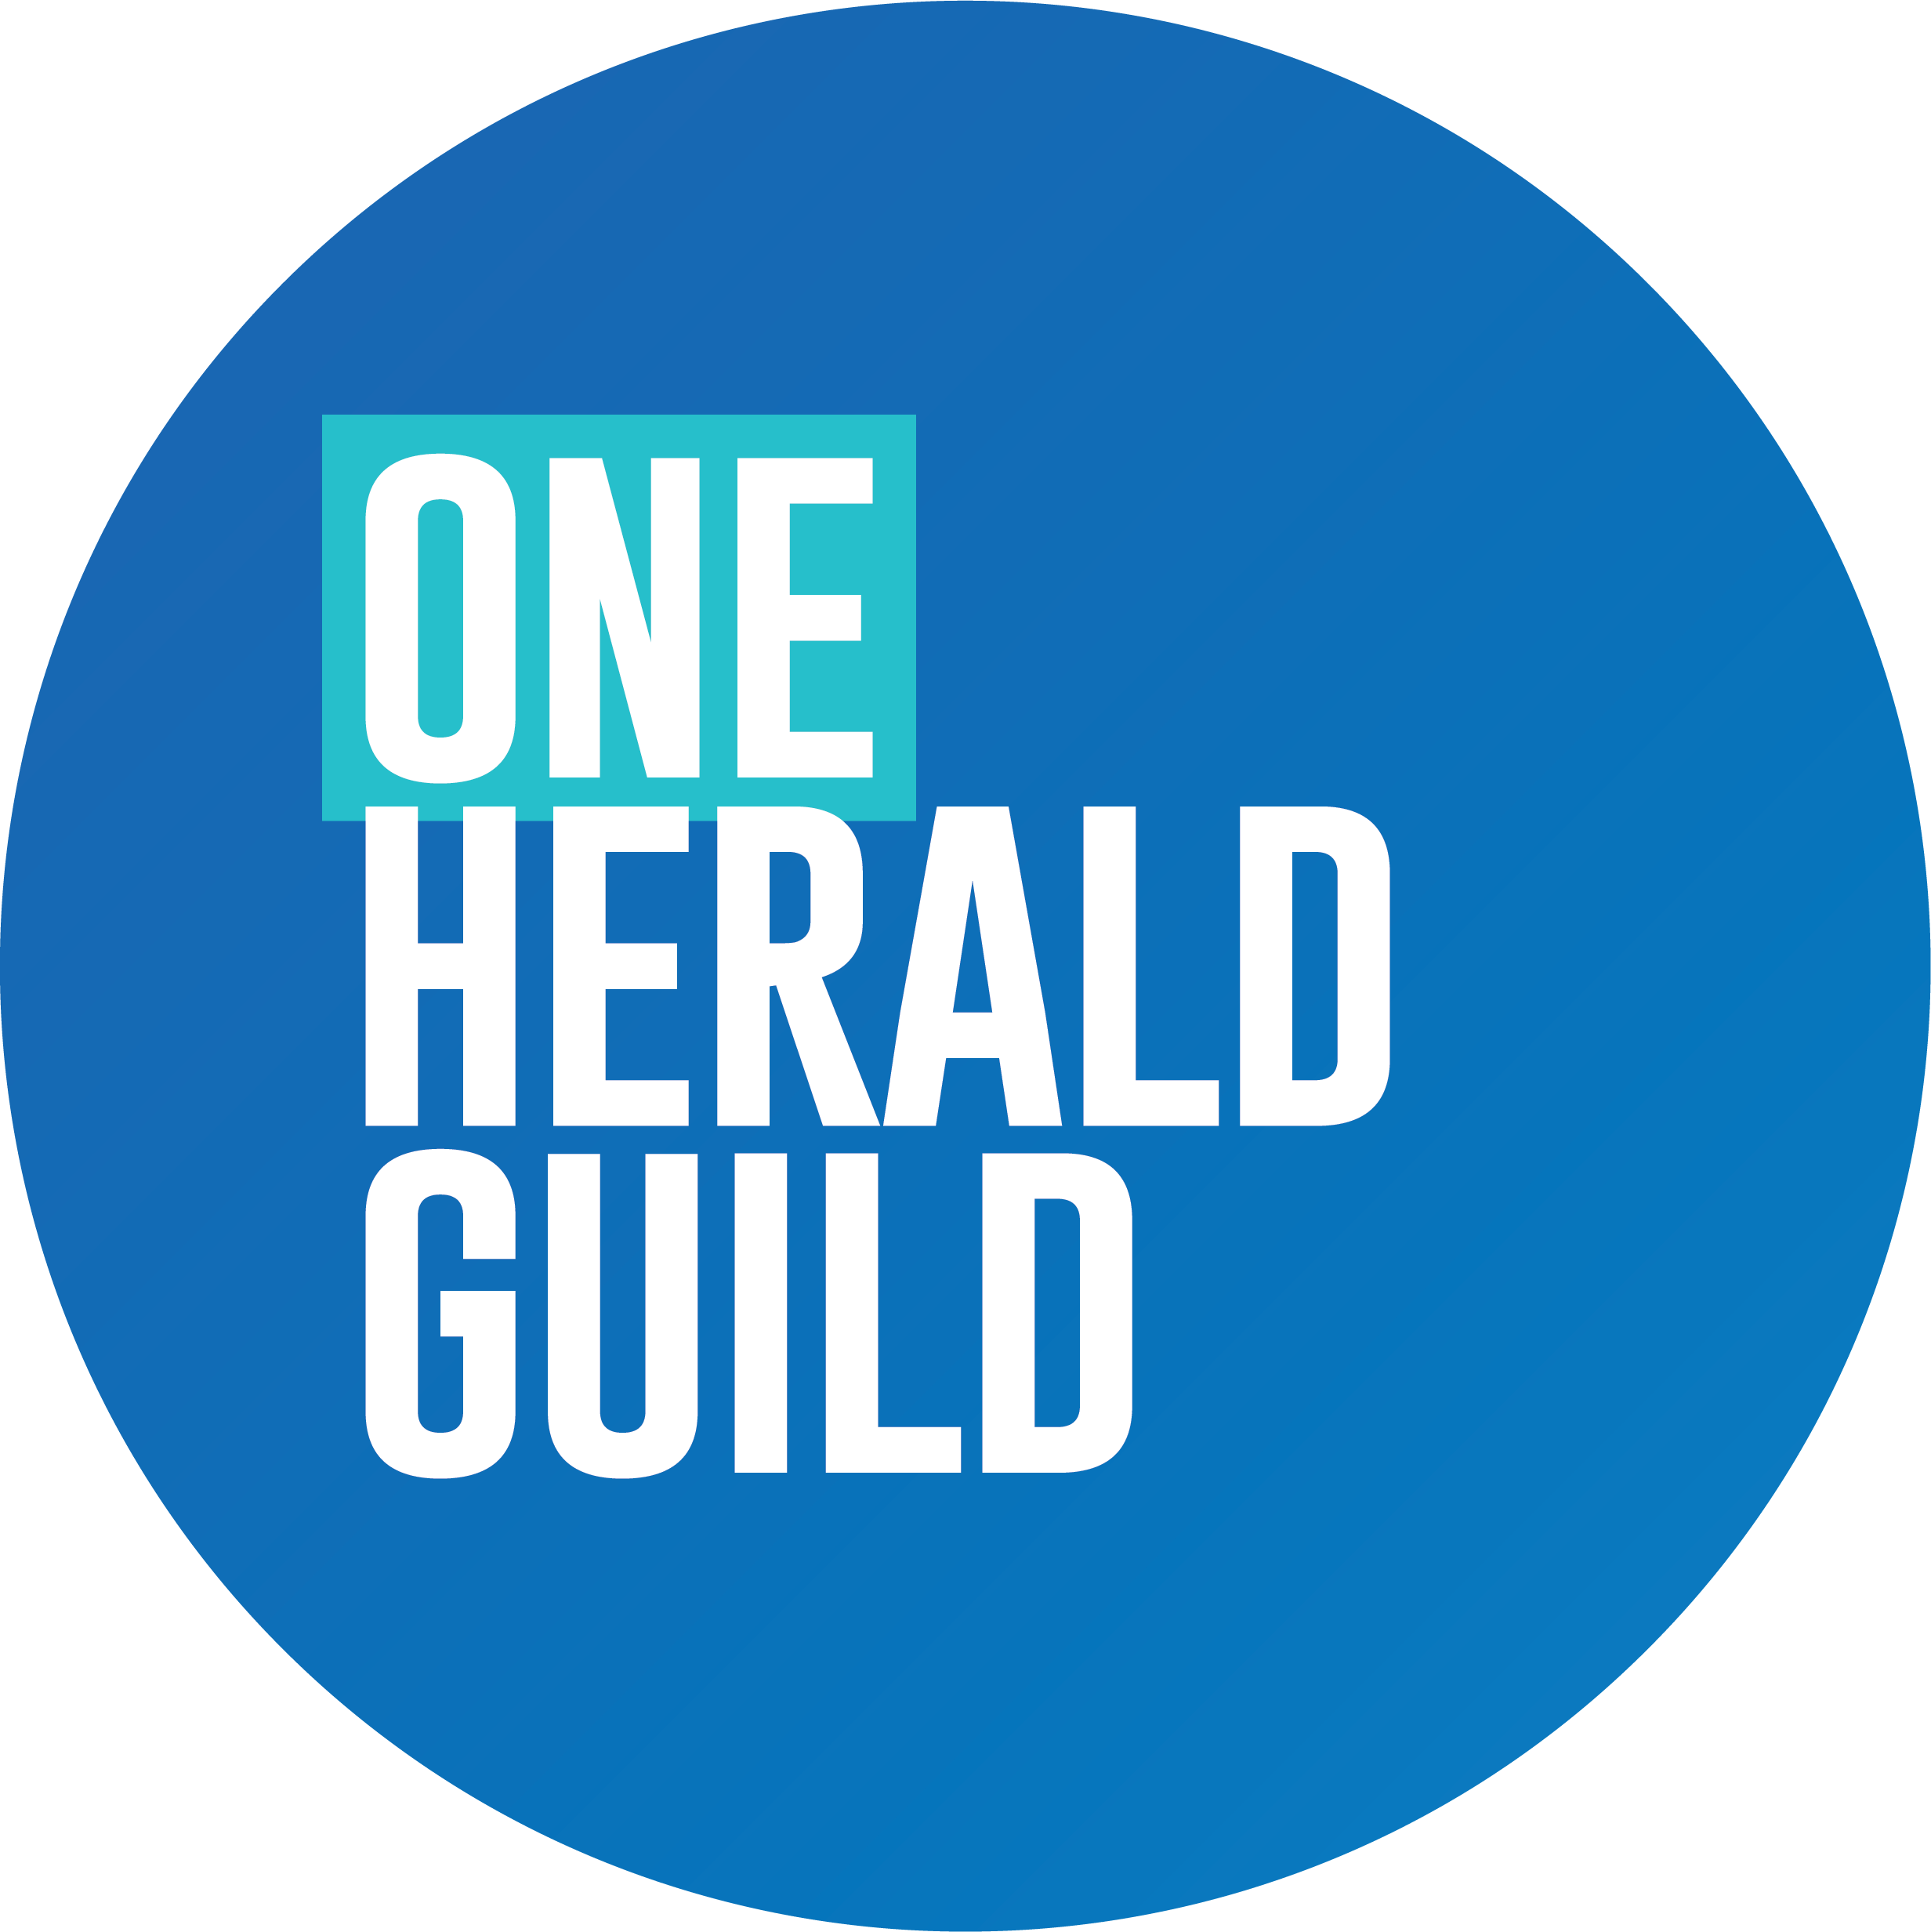 One Herald Guild